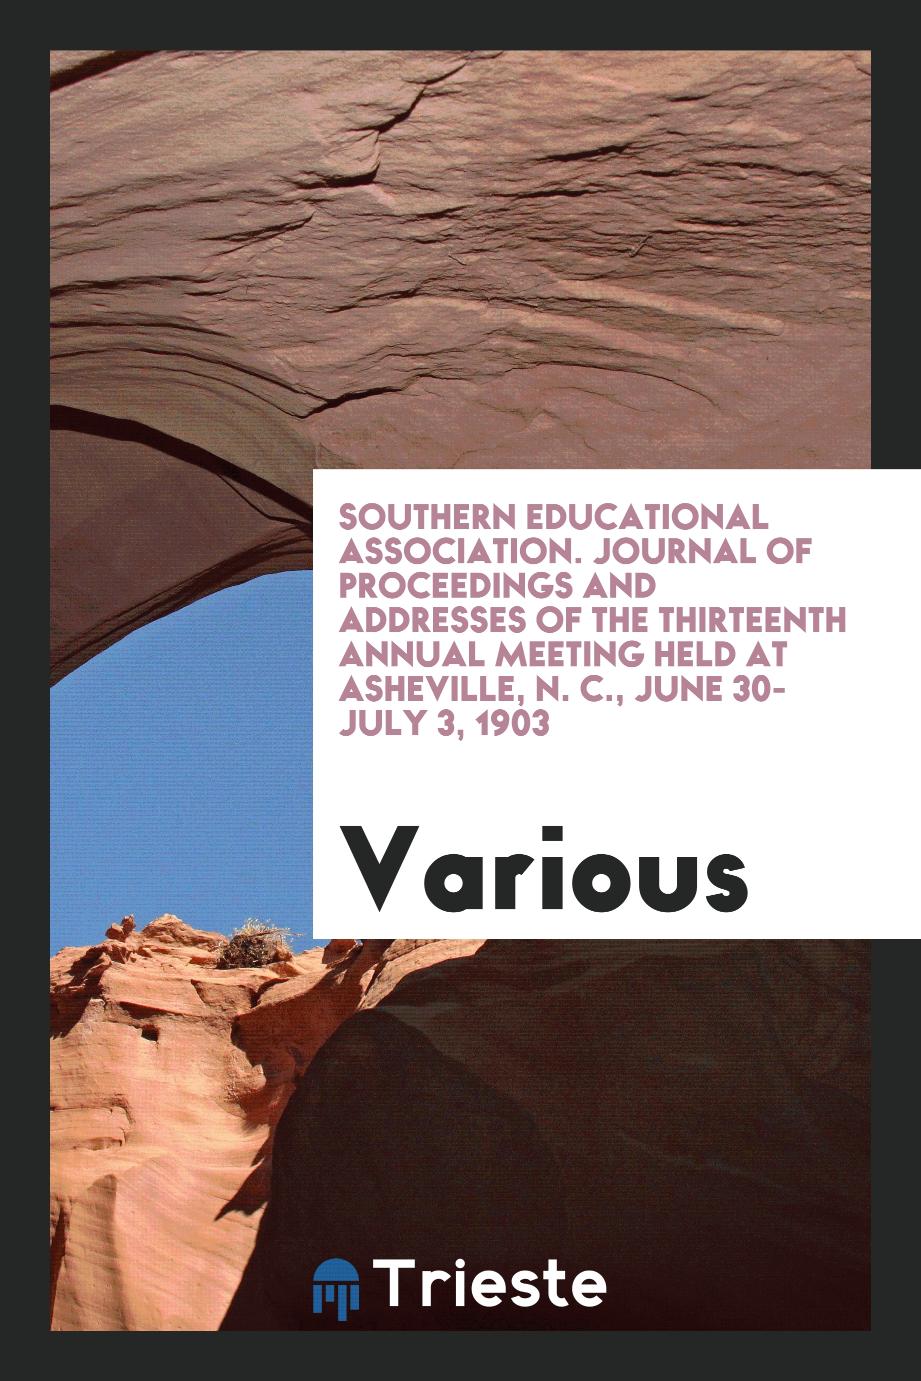 Southern Educational Association. Journal of Proceedings and Addresses of the Thirteenth Annual Meeting Held at Asheville, N. C., June 30-July 3, 1903